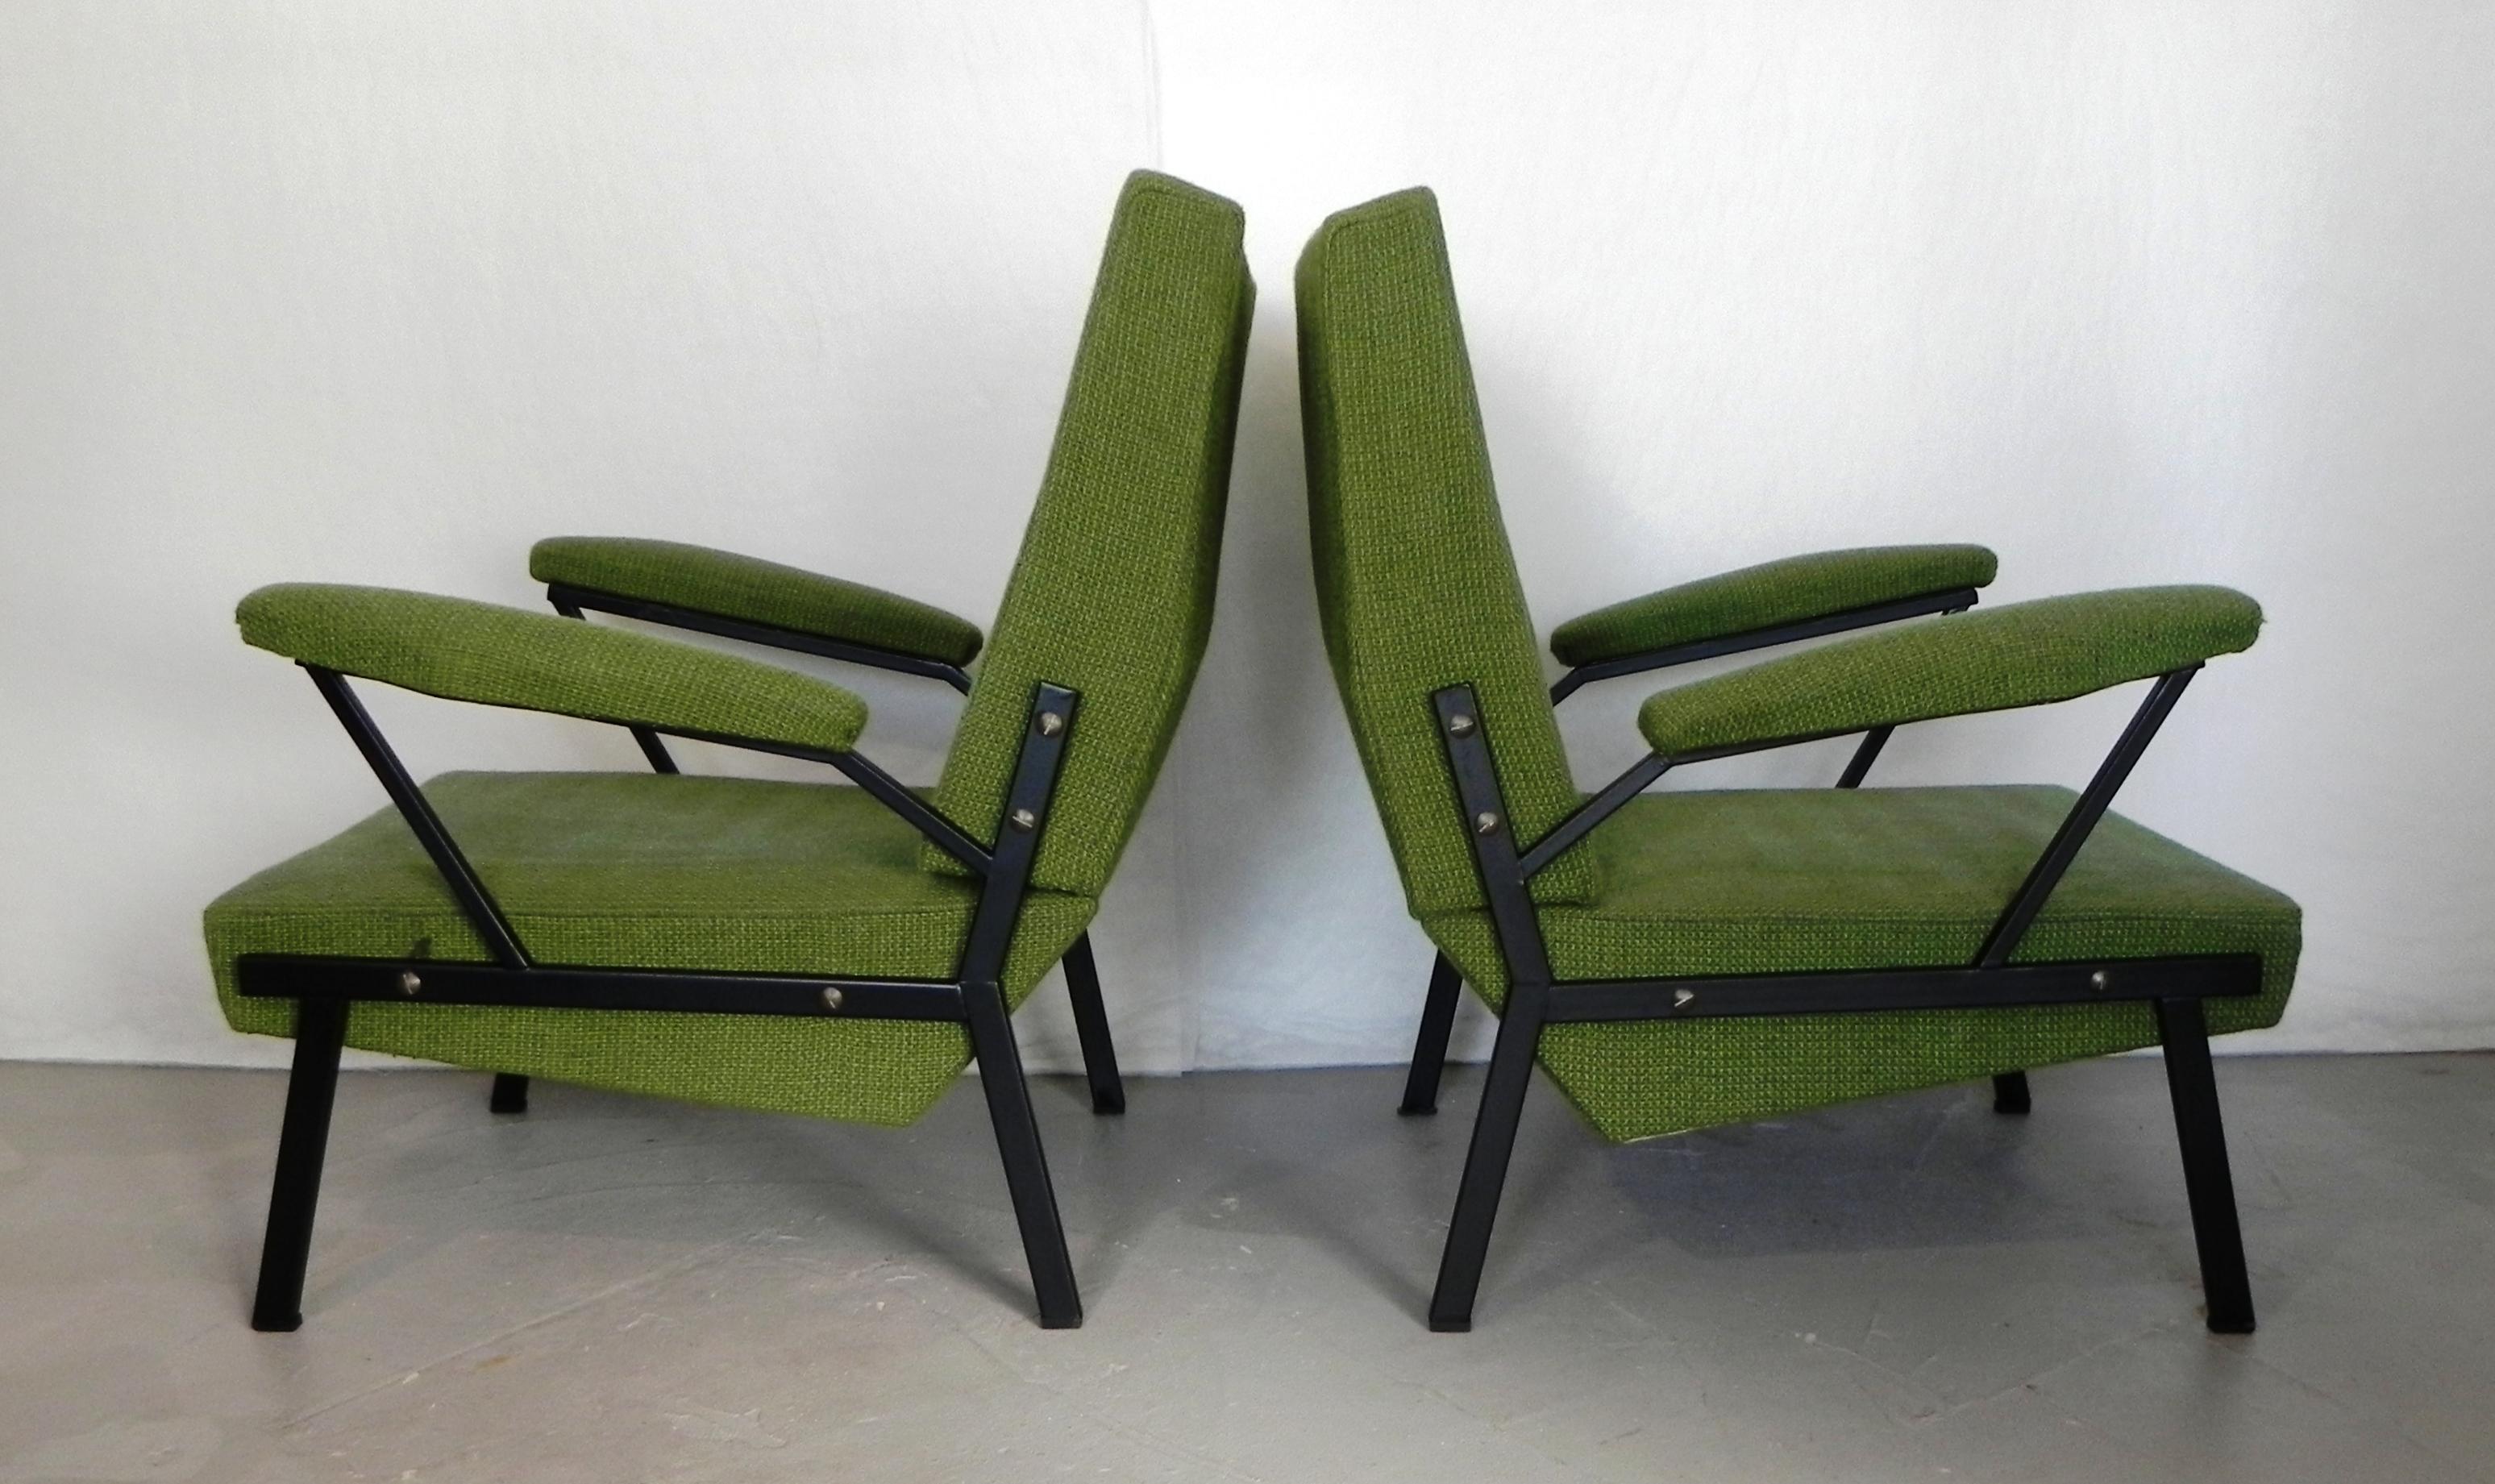 Metal 2 armchairs from the 1960s